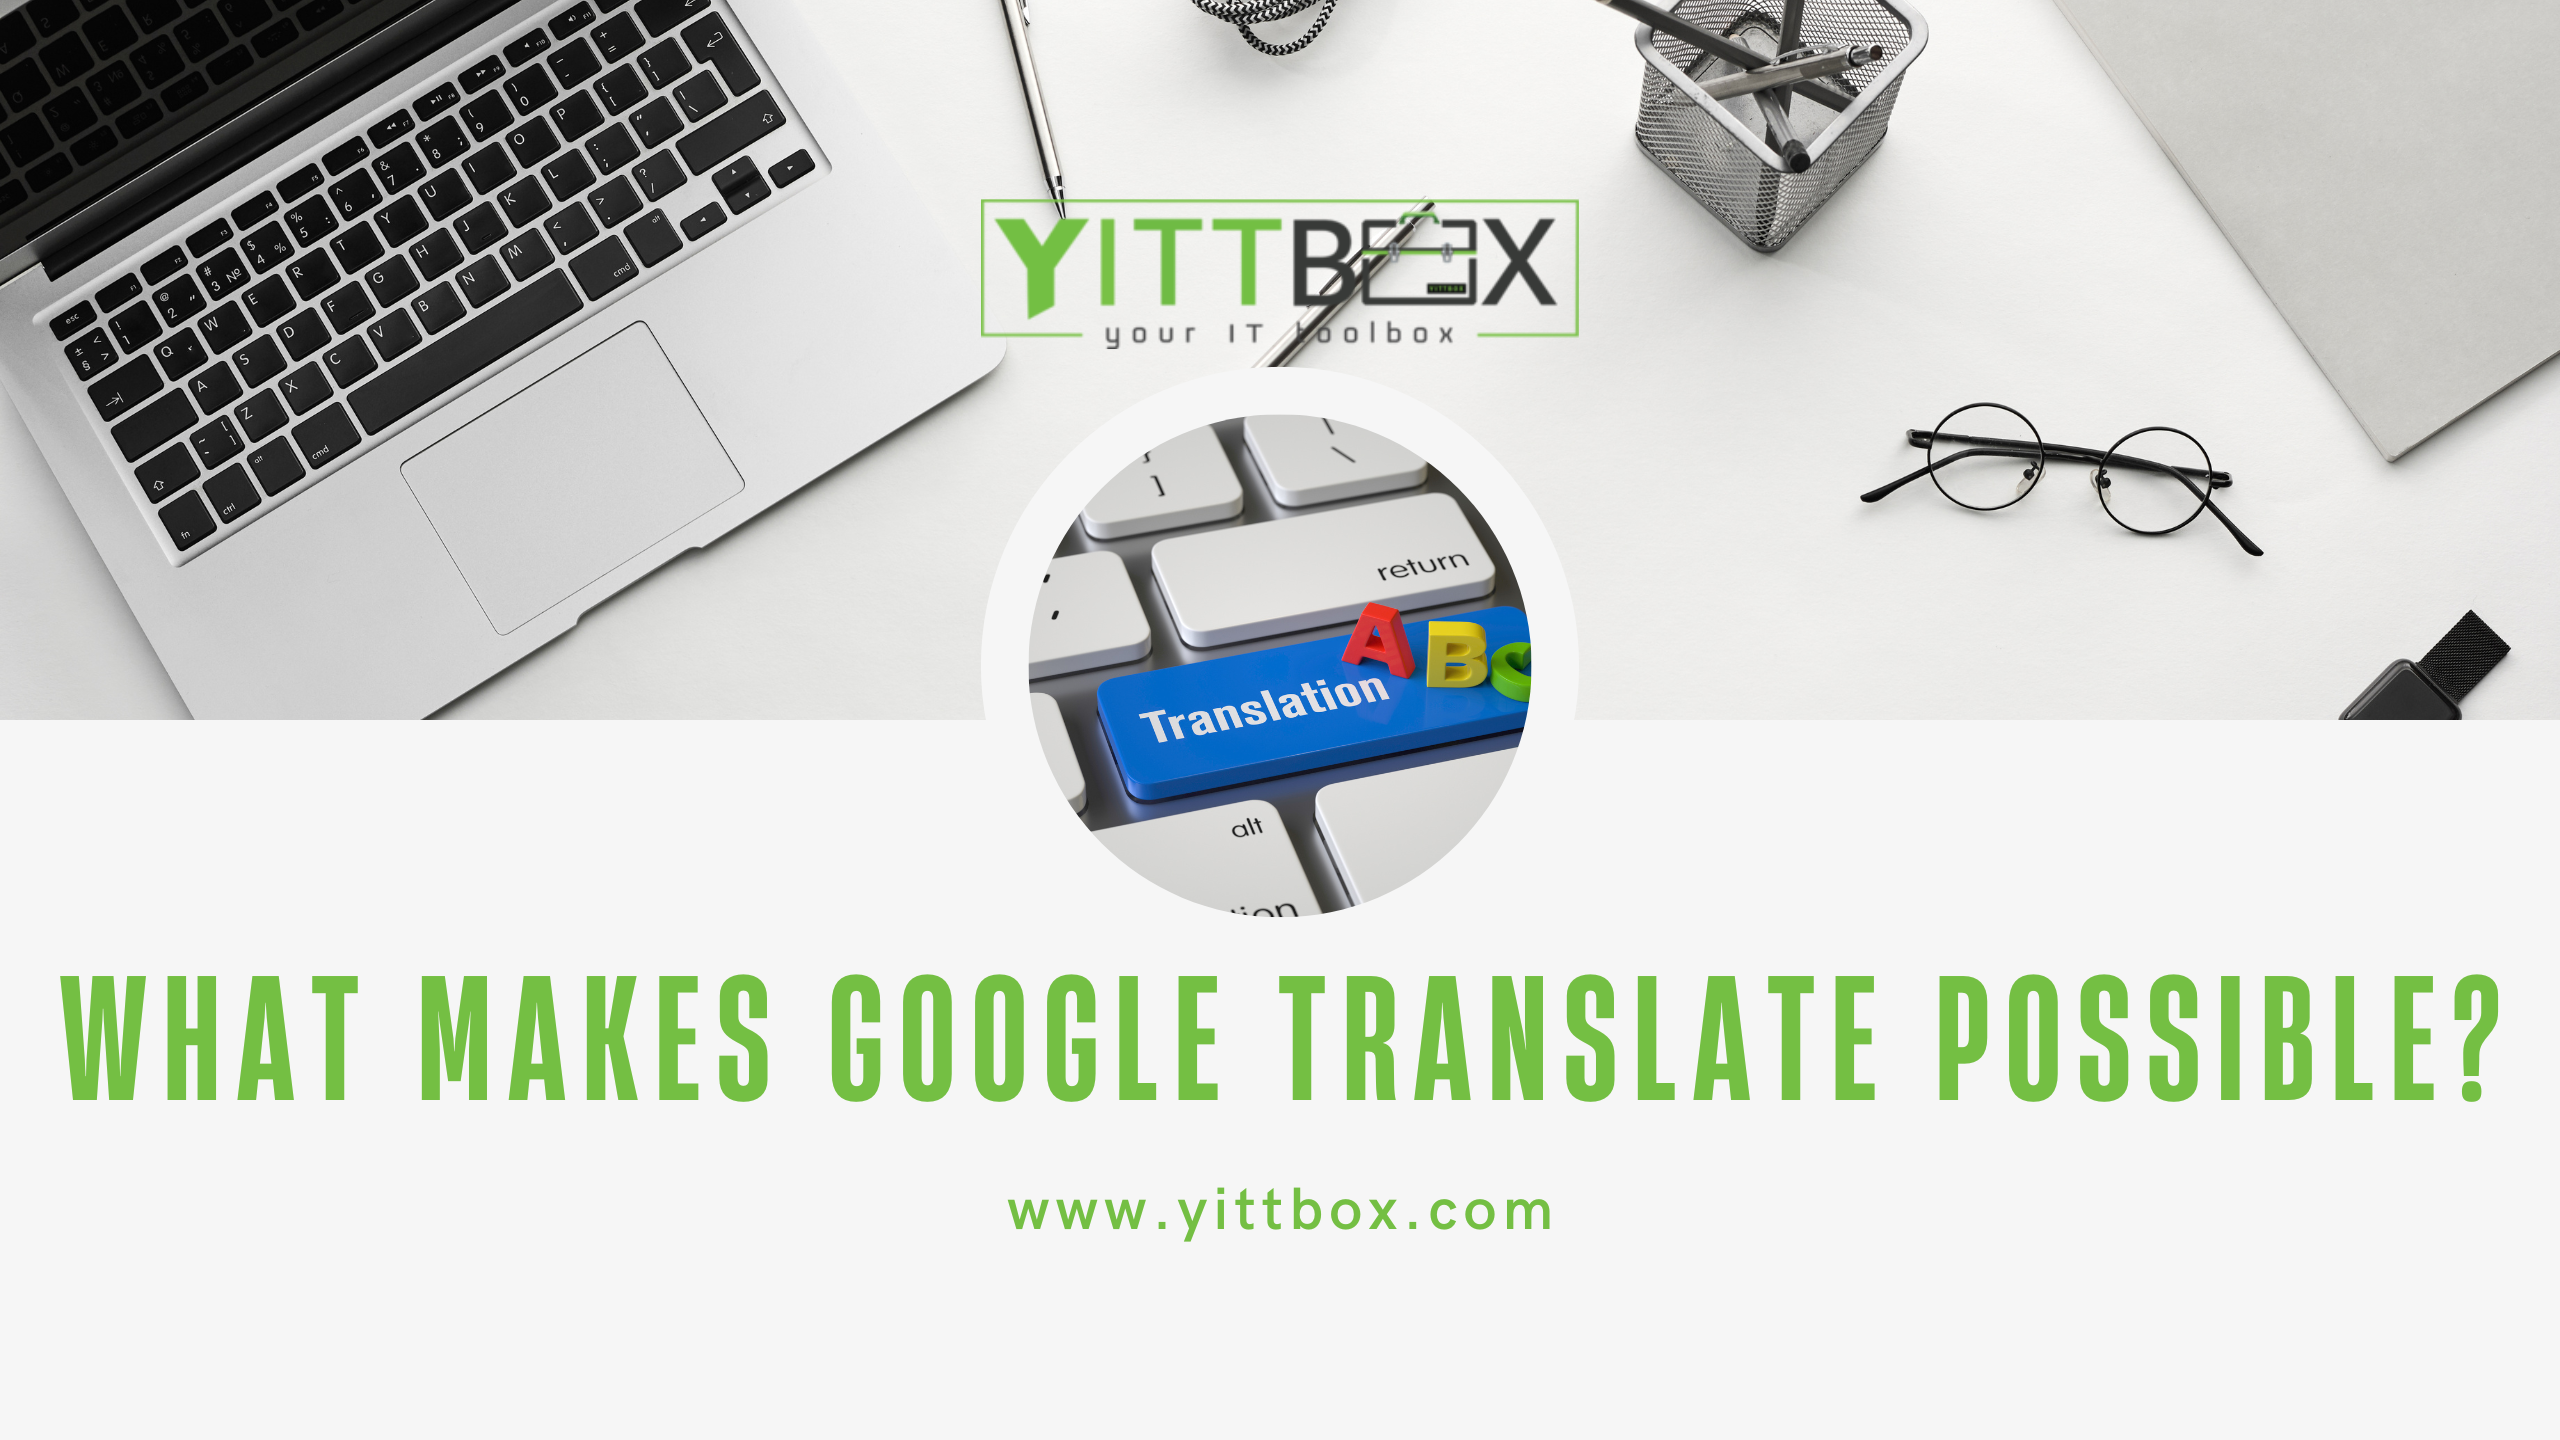 What makes Google Translate possible?